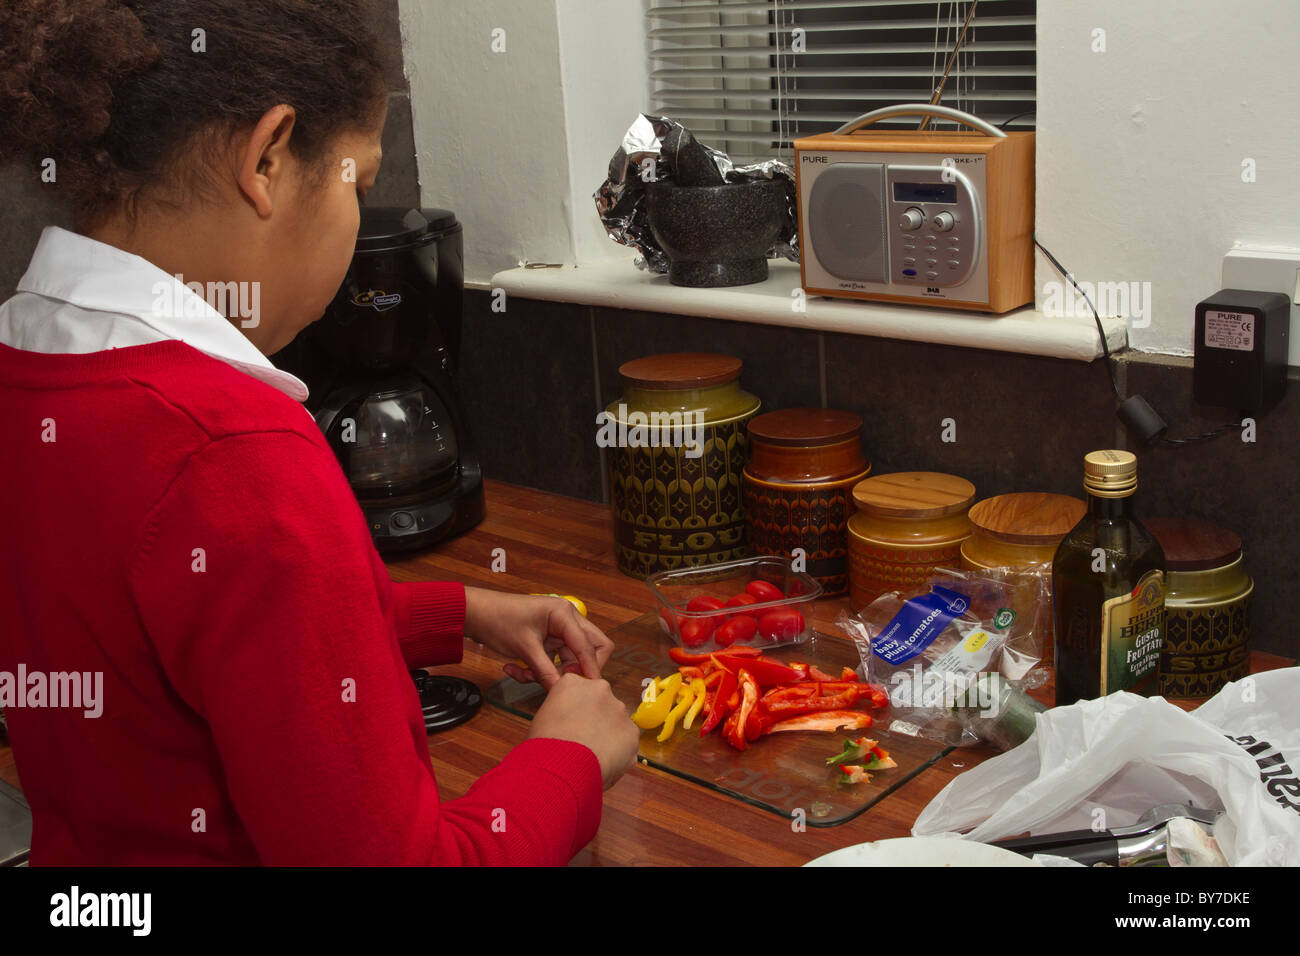 Yong mixed race school girl preparing vegetables in kitchen. Stock Photo